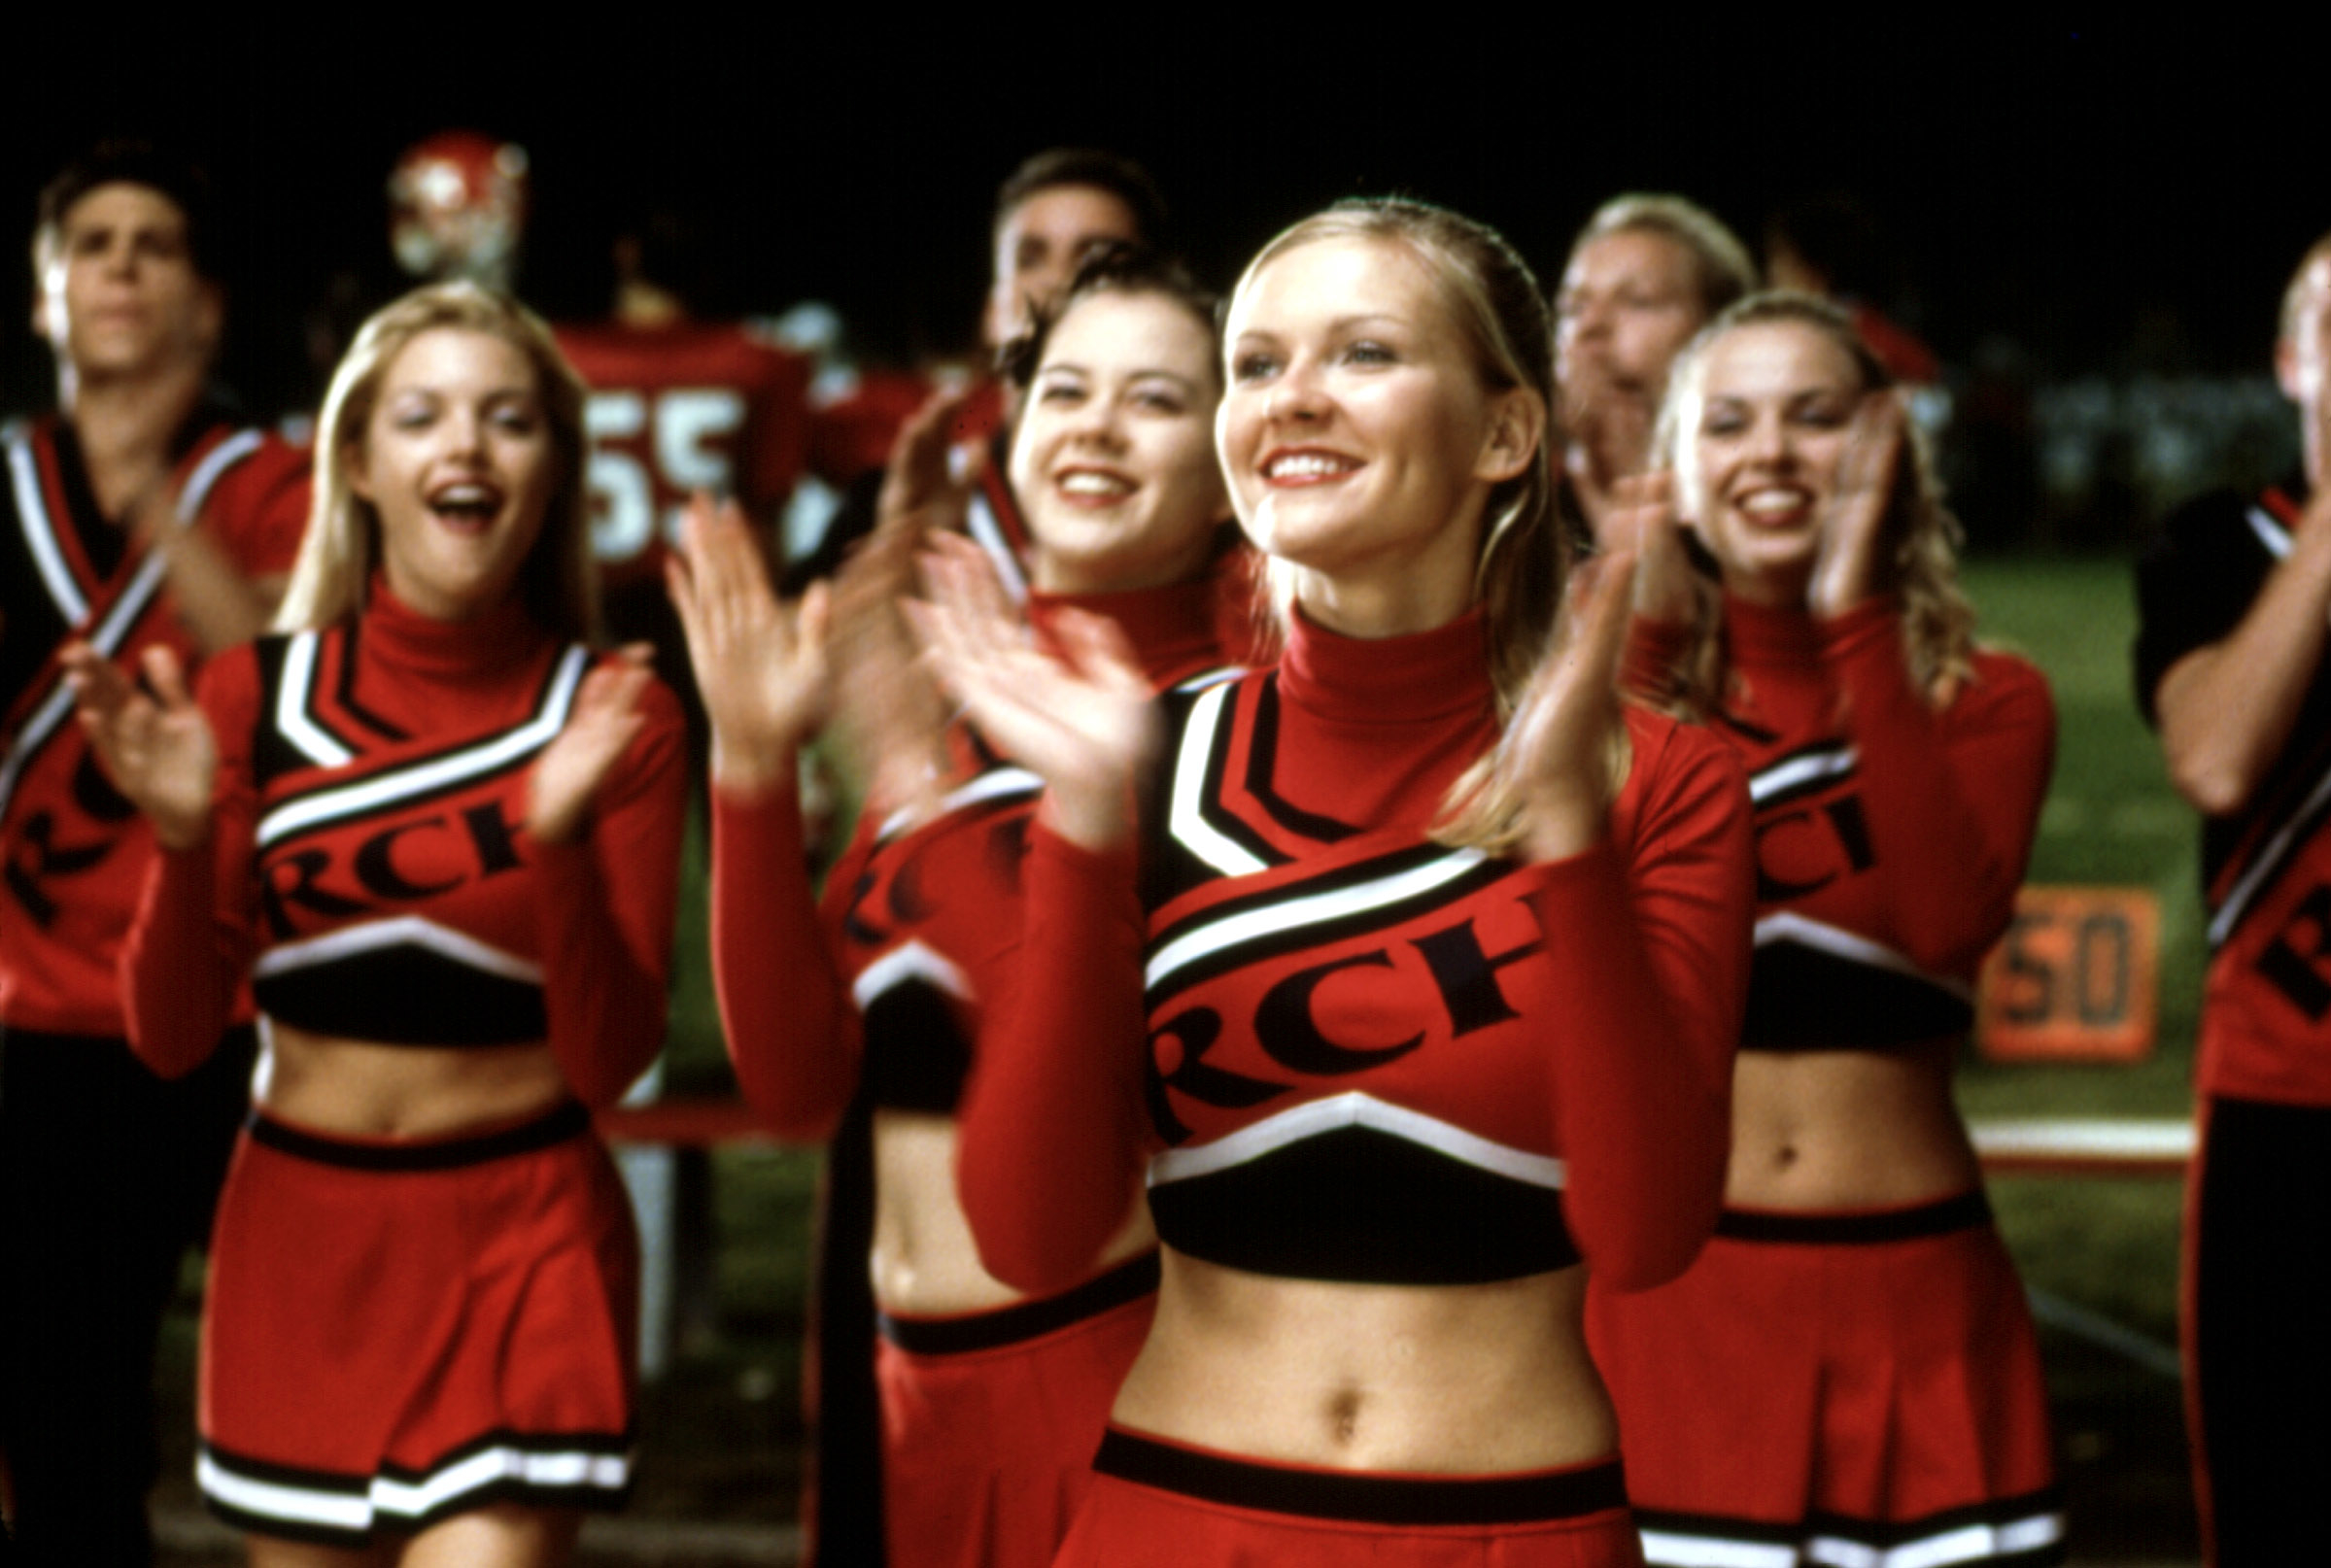 Group of cheerleaders in red and black uniforms performing at a sporting event